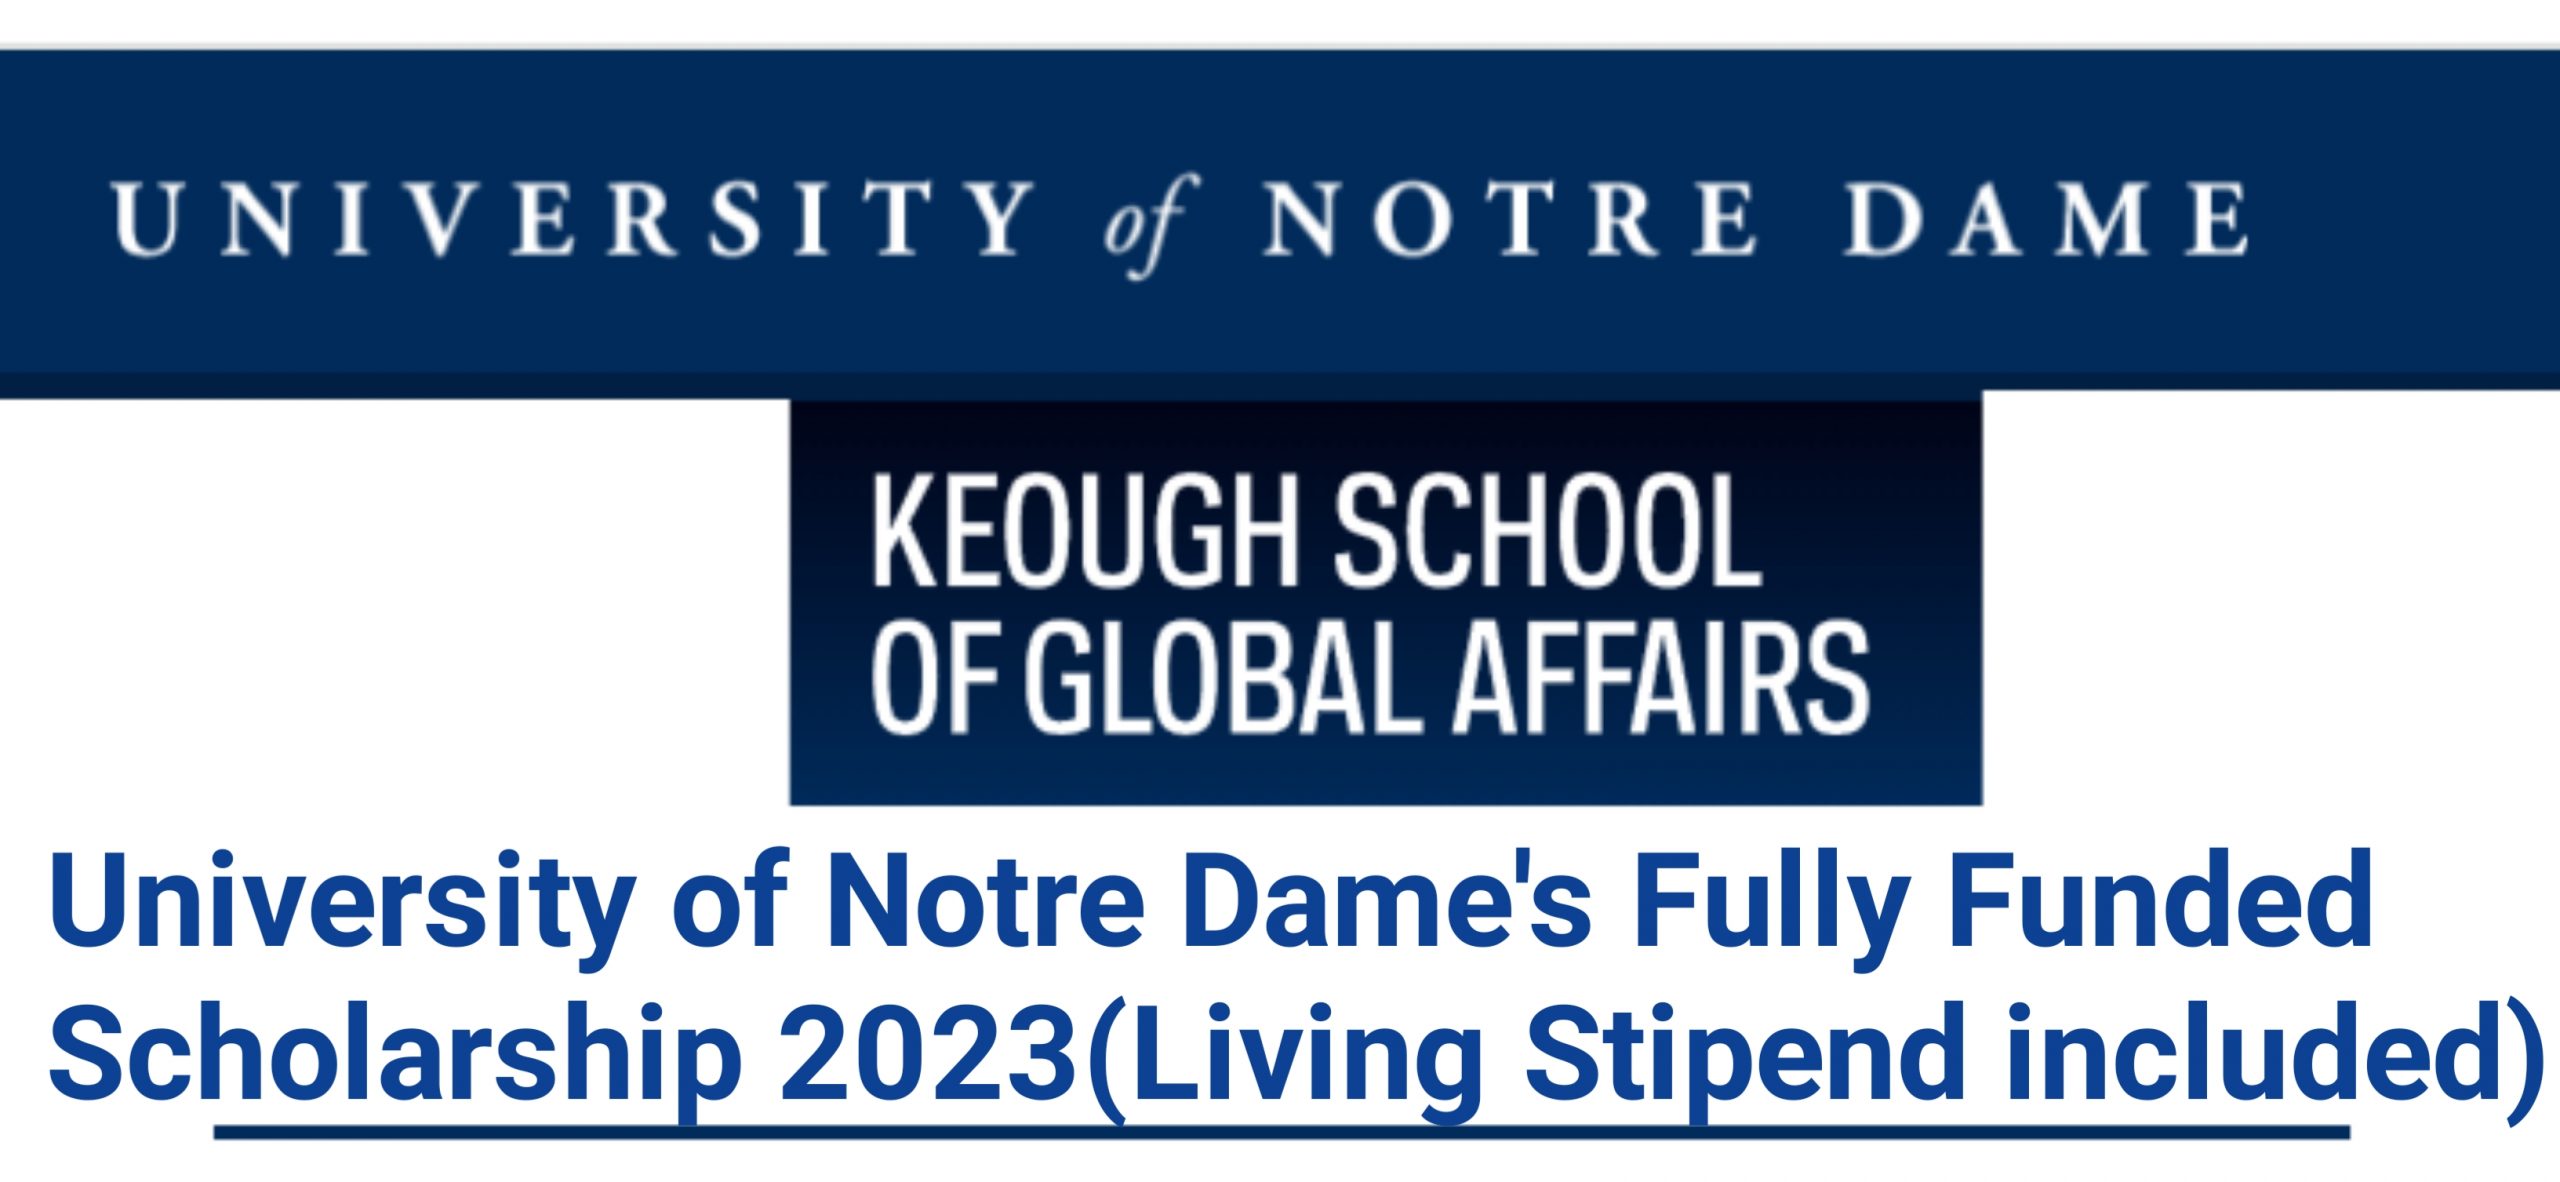 20220924 151742 scaled - University of Notre Dame's Fully Funded Scholarship 2023(Living Stipend included)